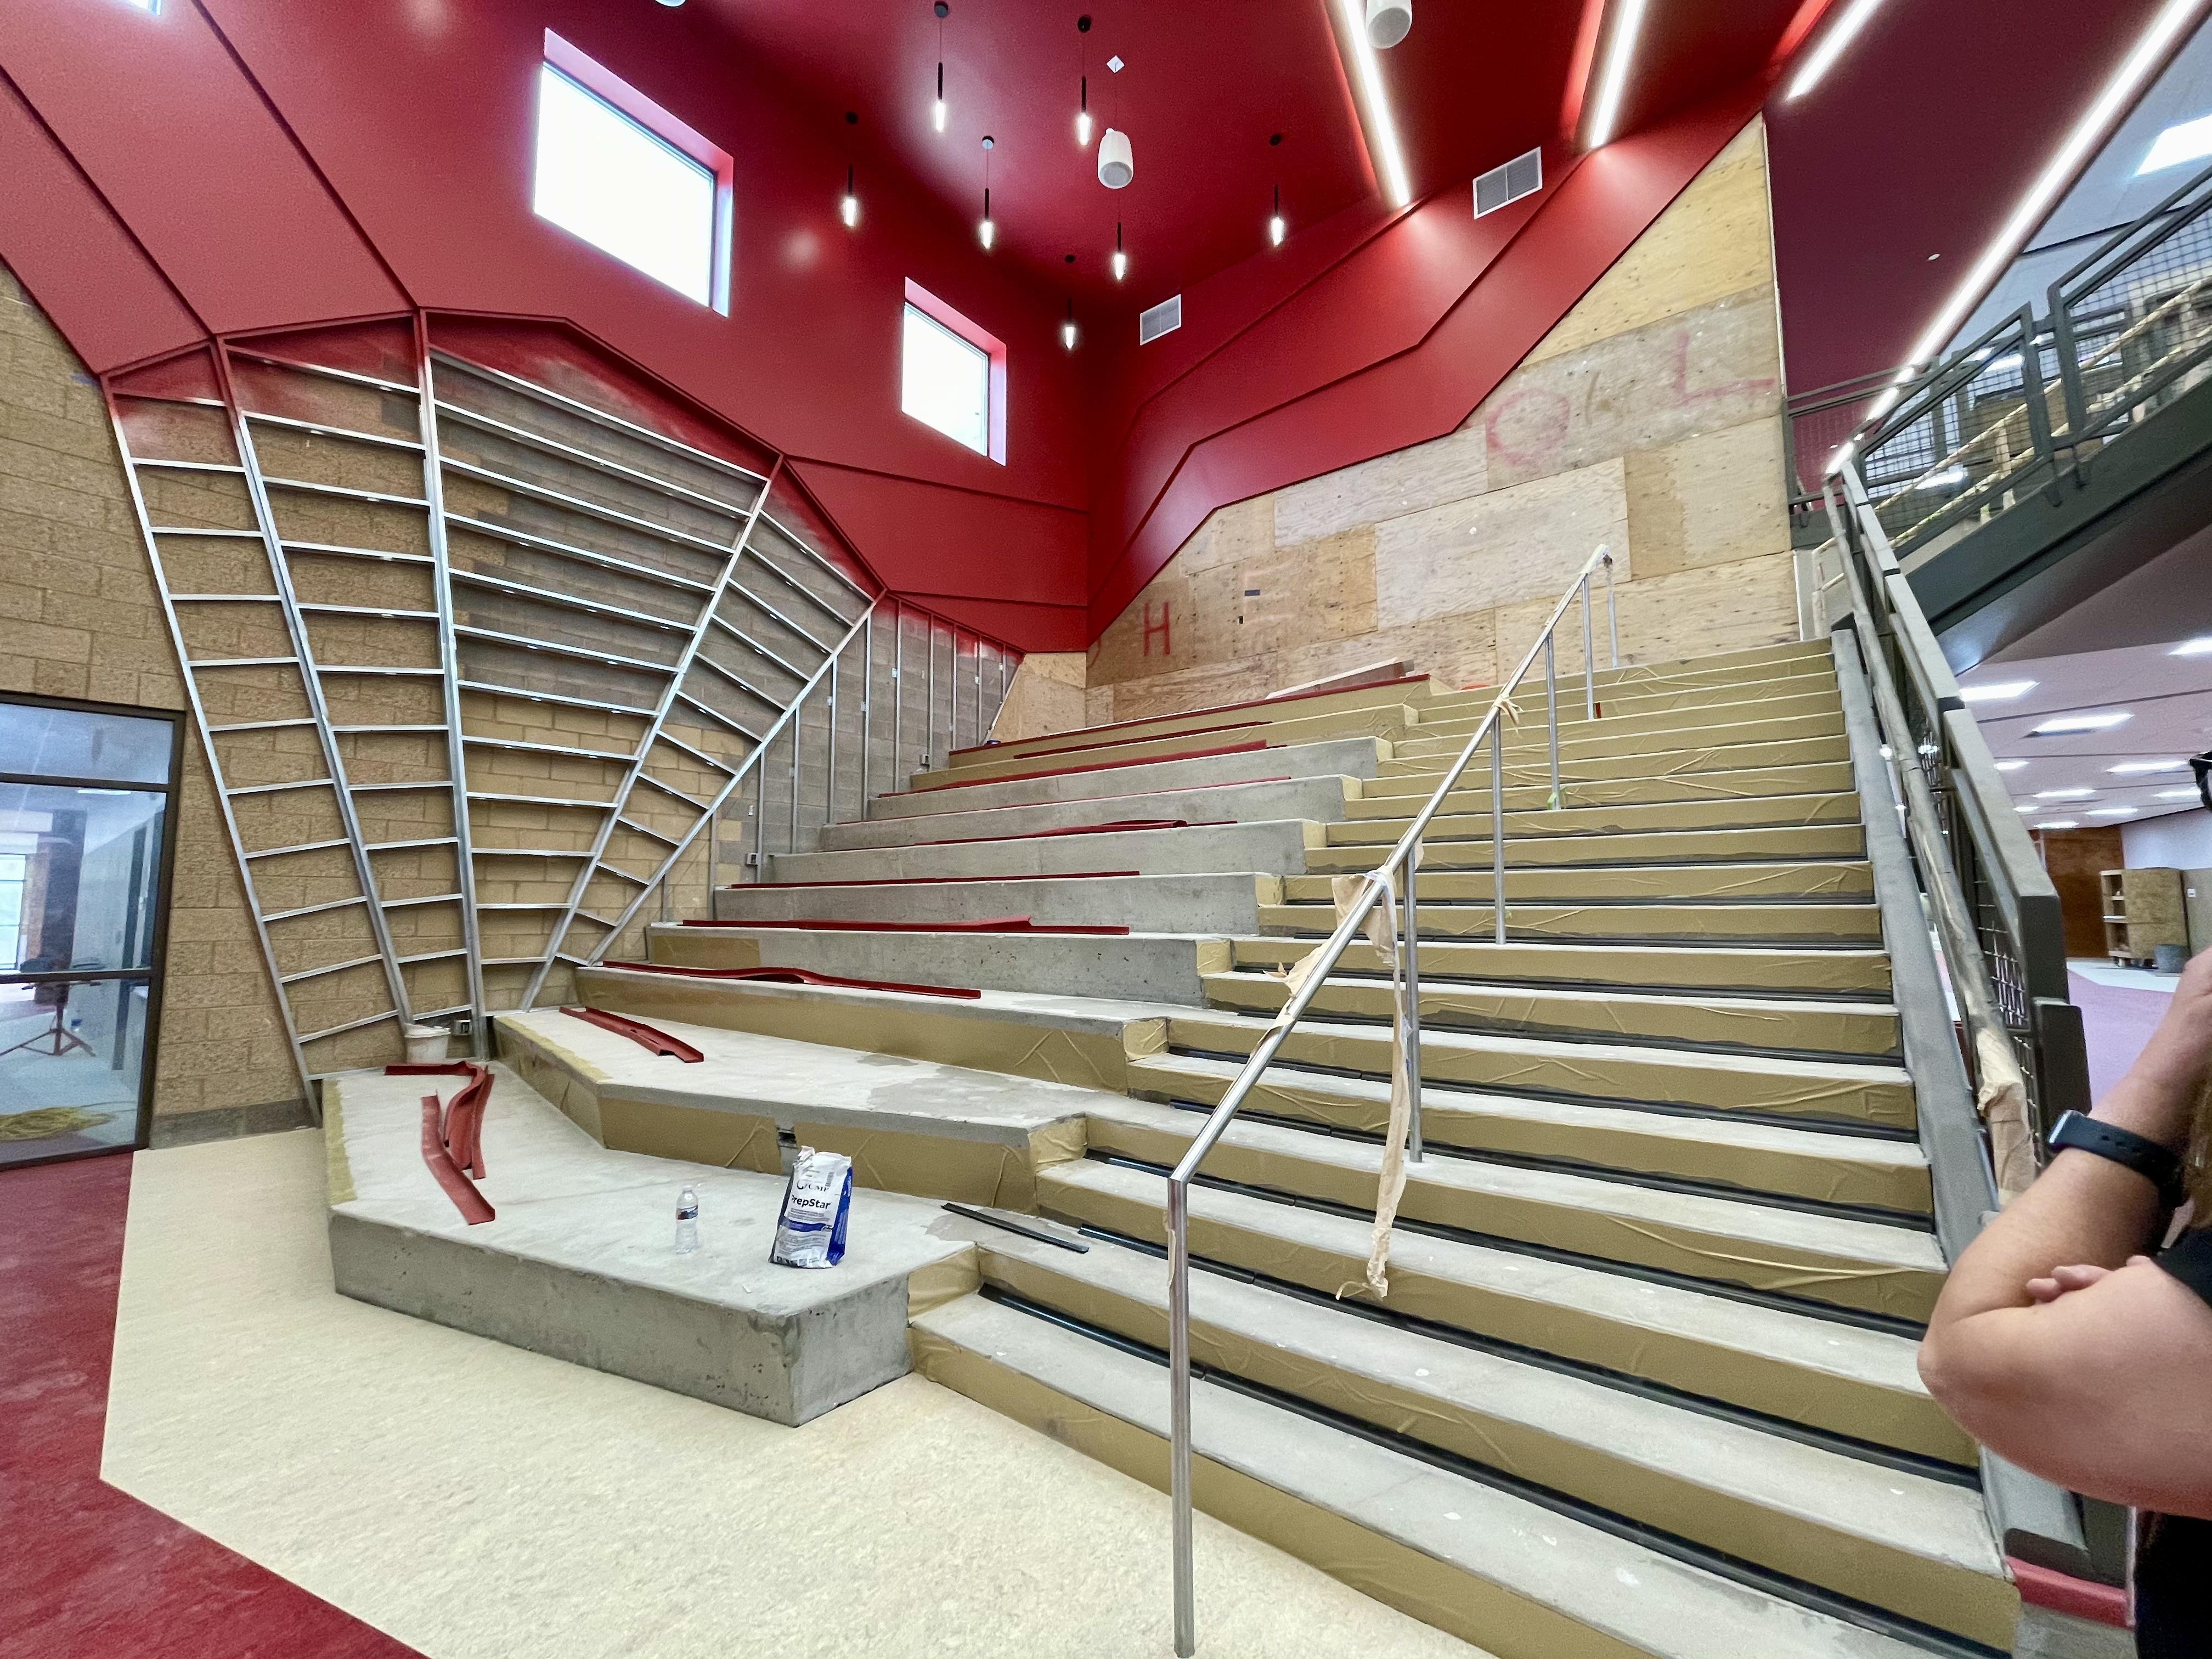 This stairwell doubles as a learning and study space, with tiered seating that faces a wall of monitors. 